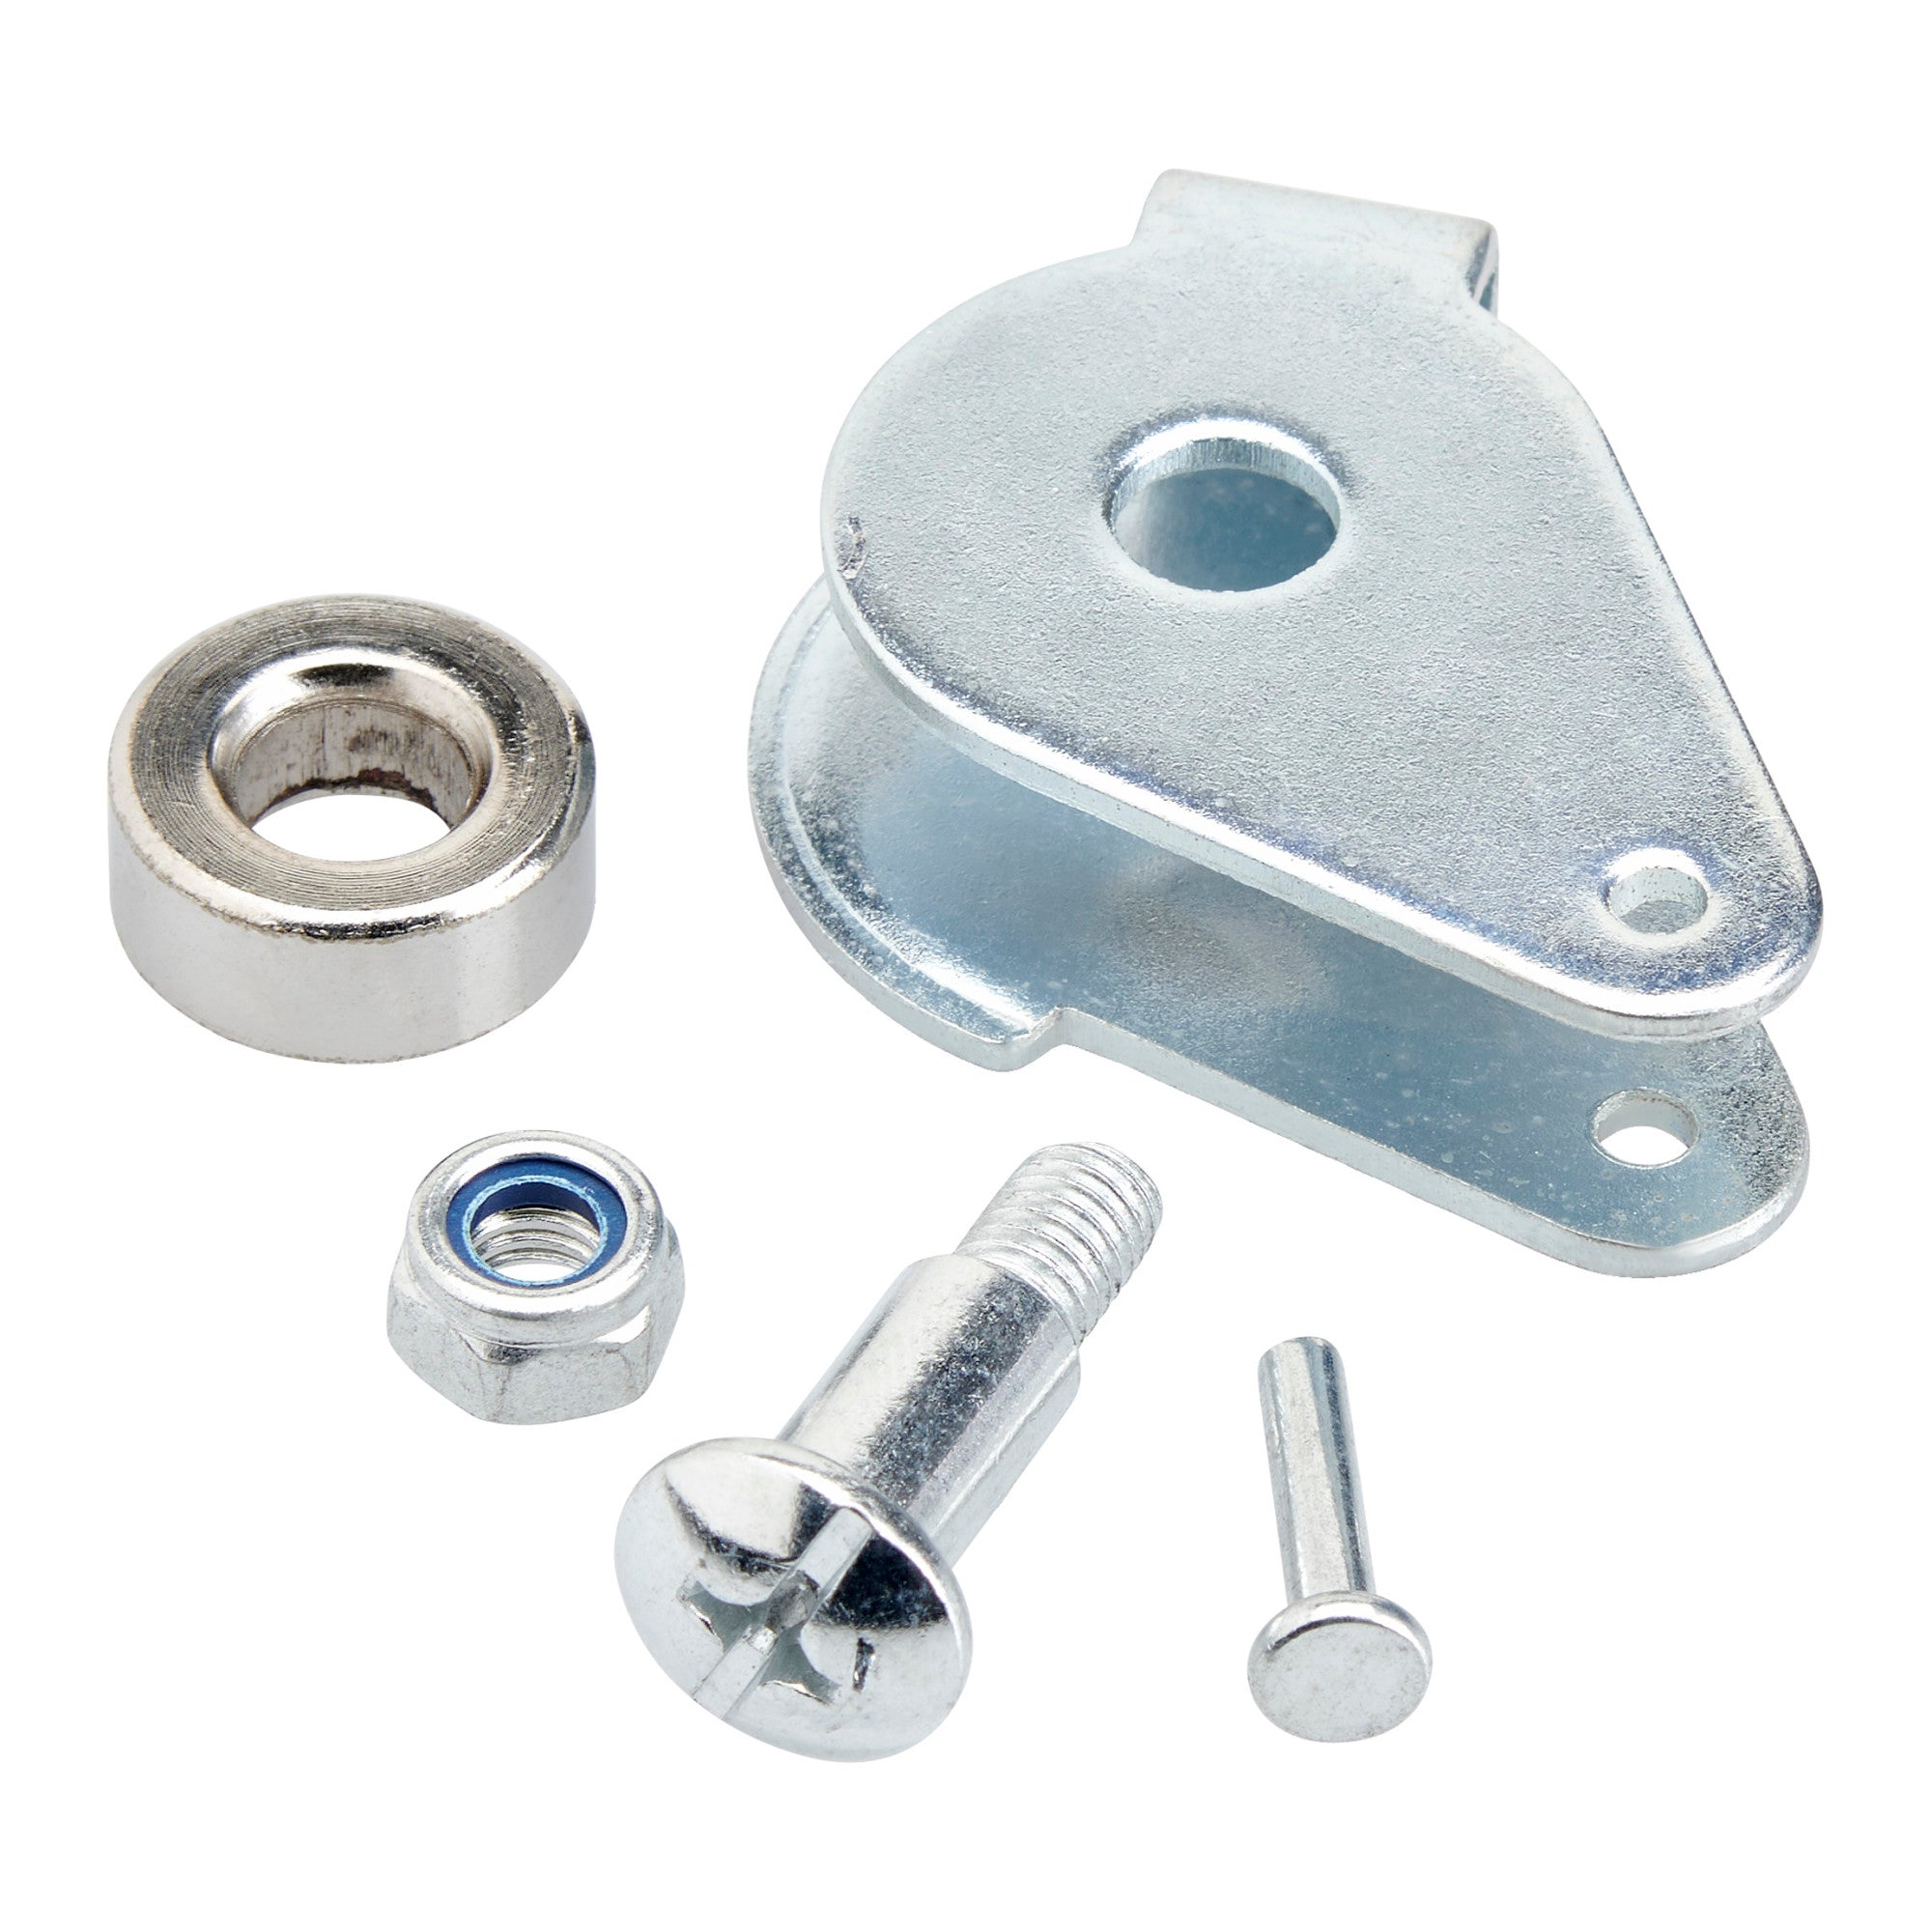 Replacement Pulley Assembly for Tree Pruner